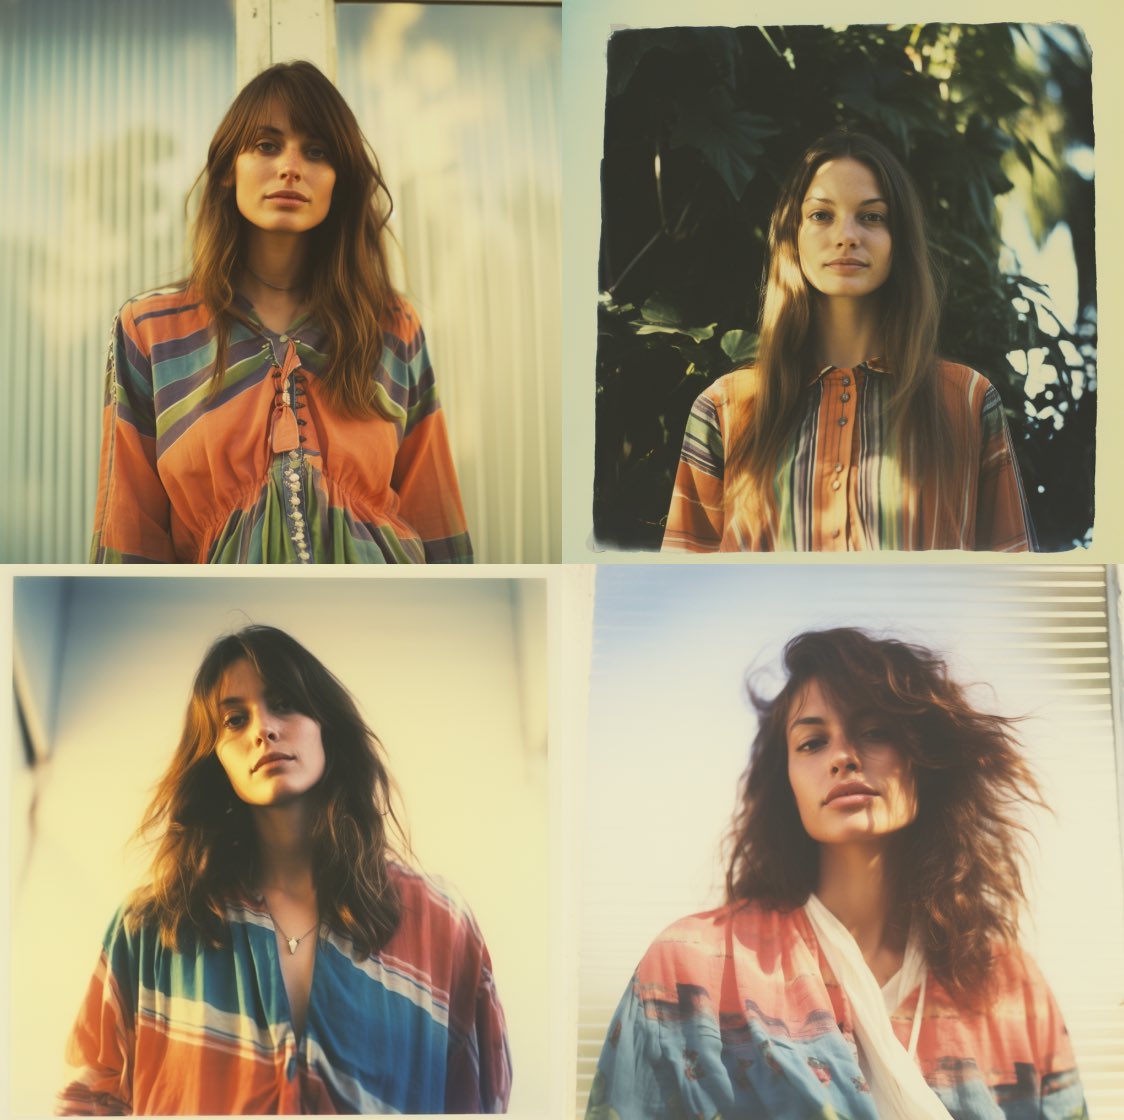 photographic outdoor studio portrait of a woman with colorful clothes, Polaroid sx 70 --seed 1234567